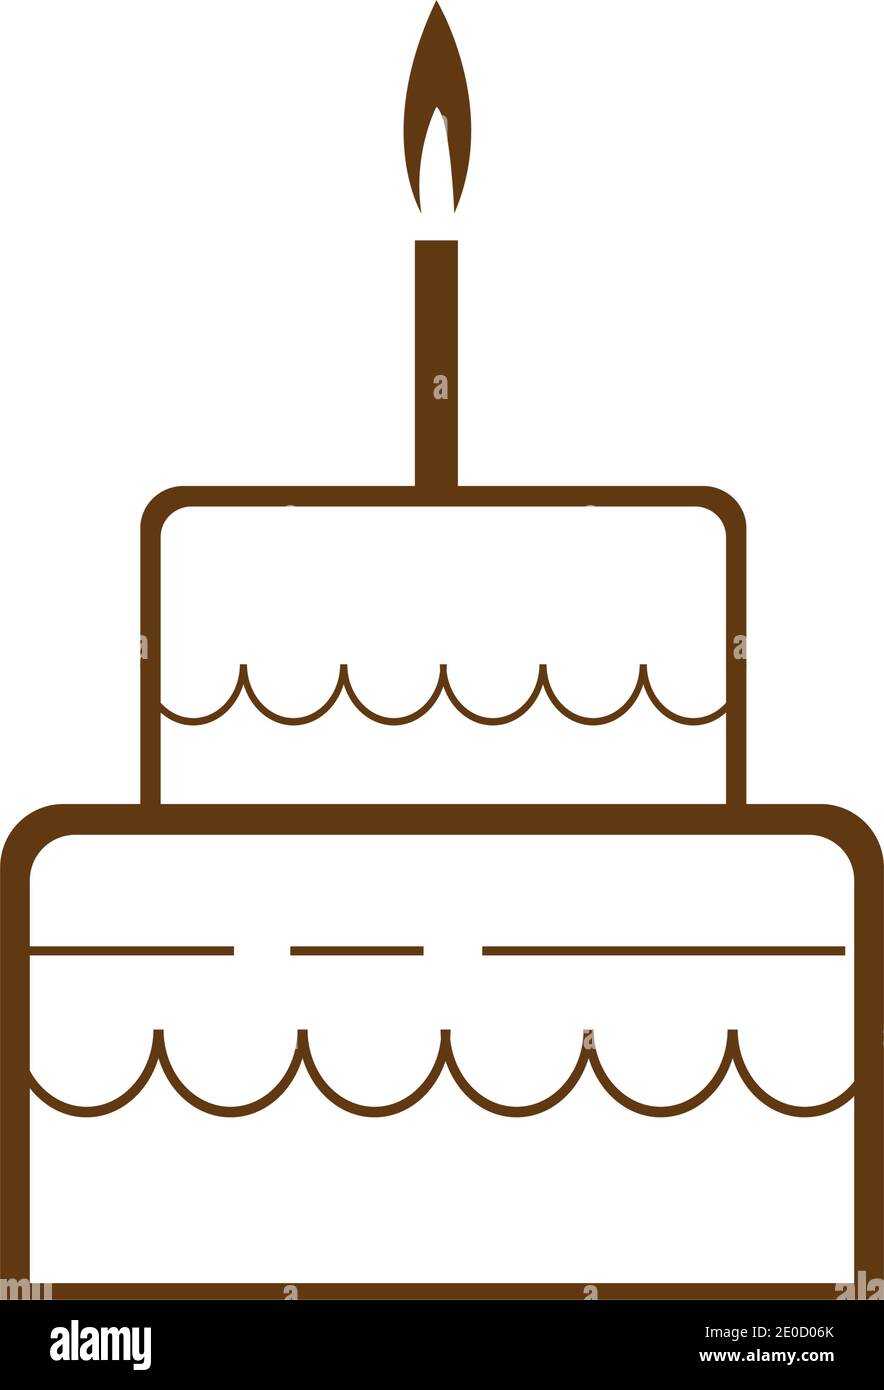 Small Cake Vector Design Images, Small Beautiful 3d Cake Decorated With  White Icing, I Love You, Lovely, February PNG Image For Free Download